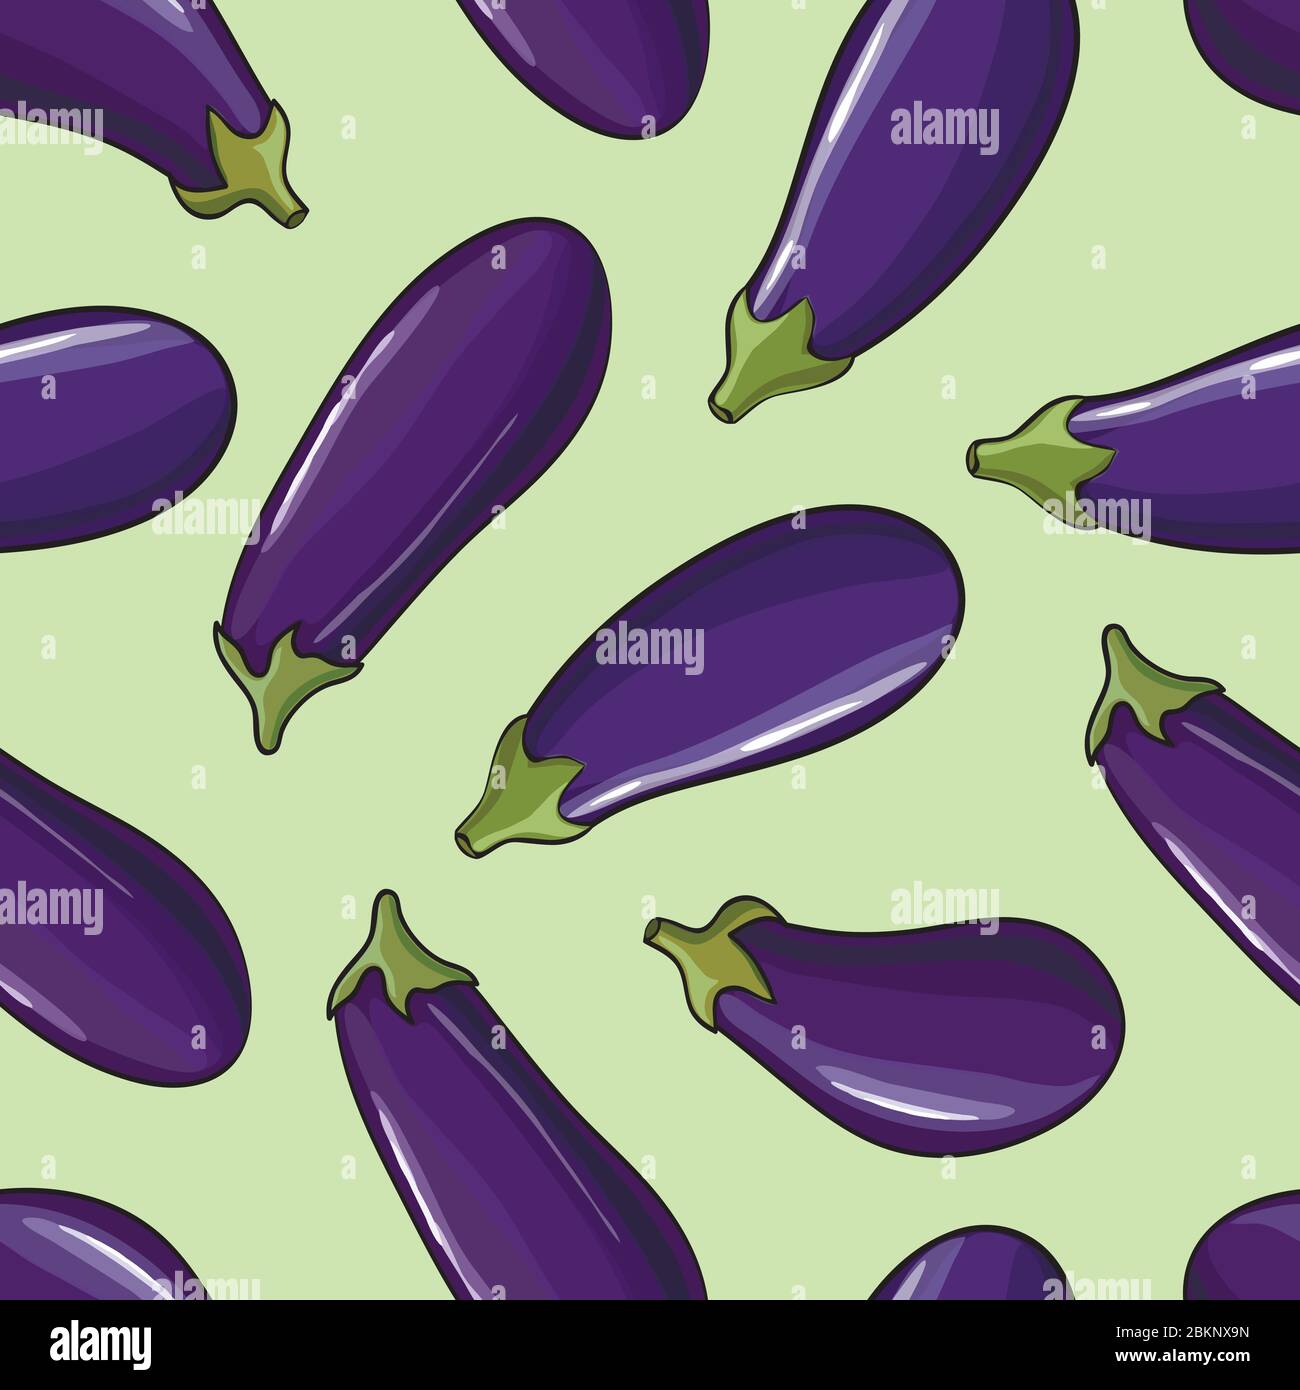 Vegetables seamless background with eggplants and cabbages. Wallpaper for vegan store. Stock Vector